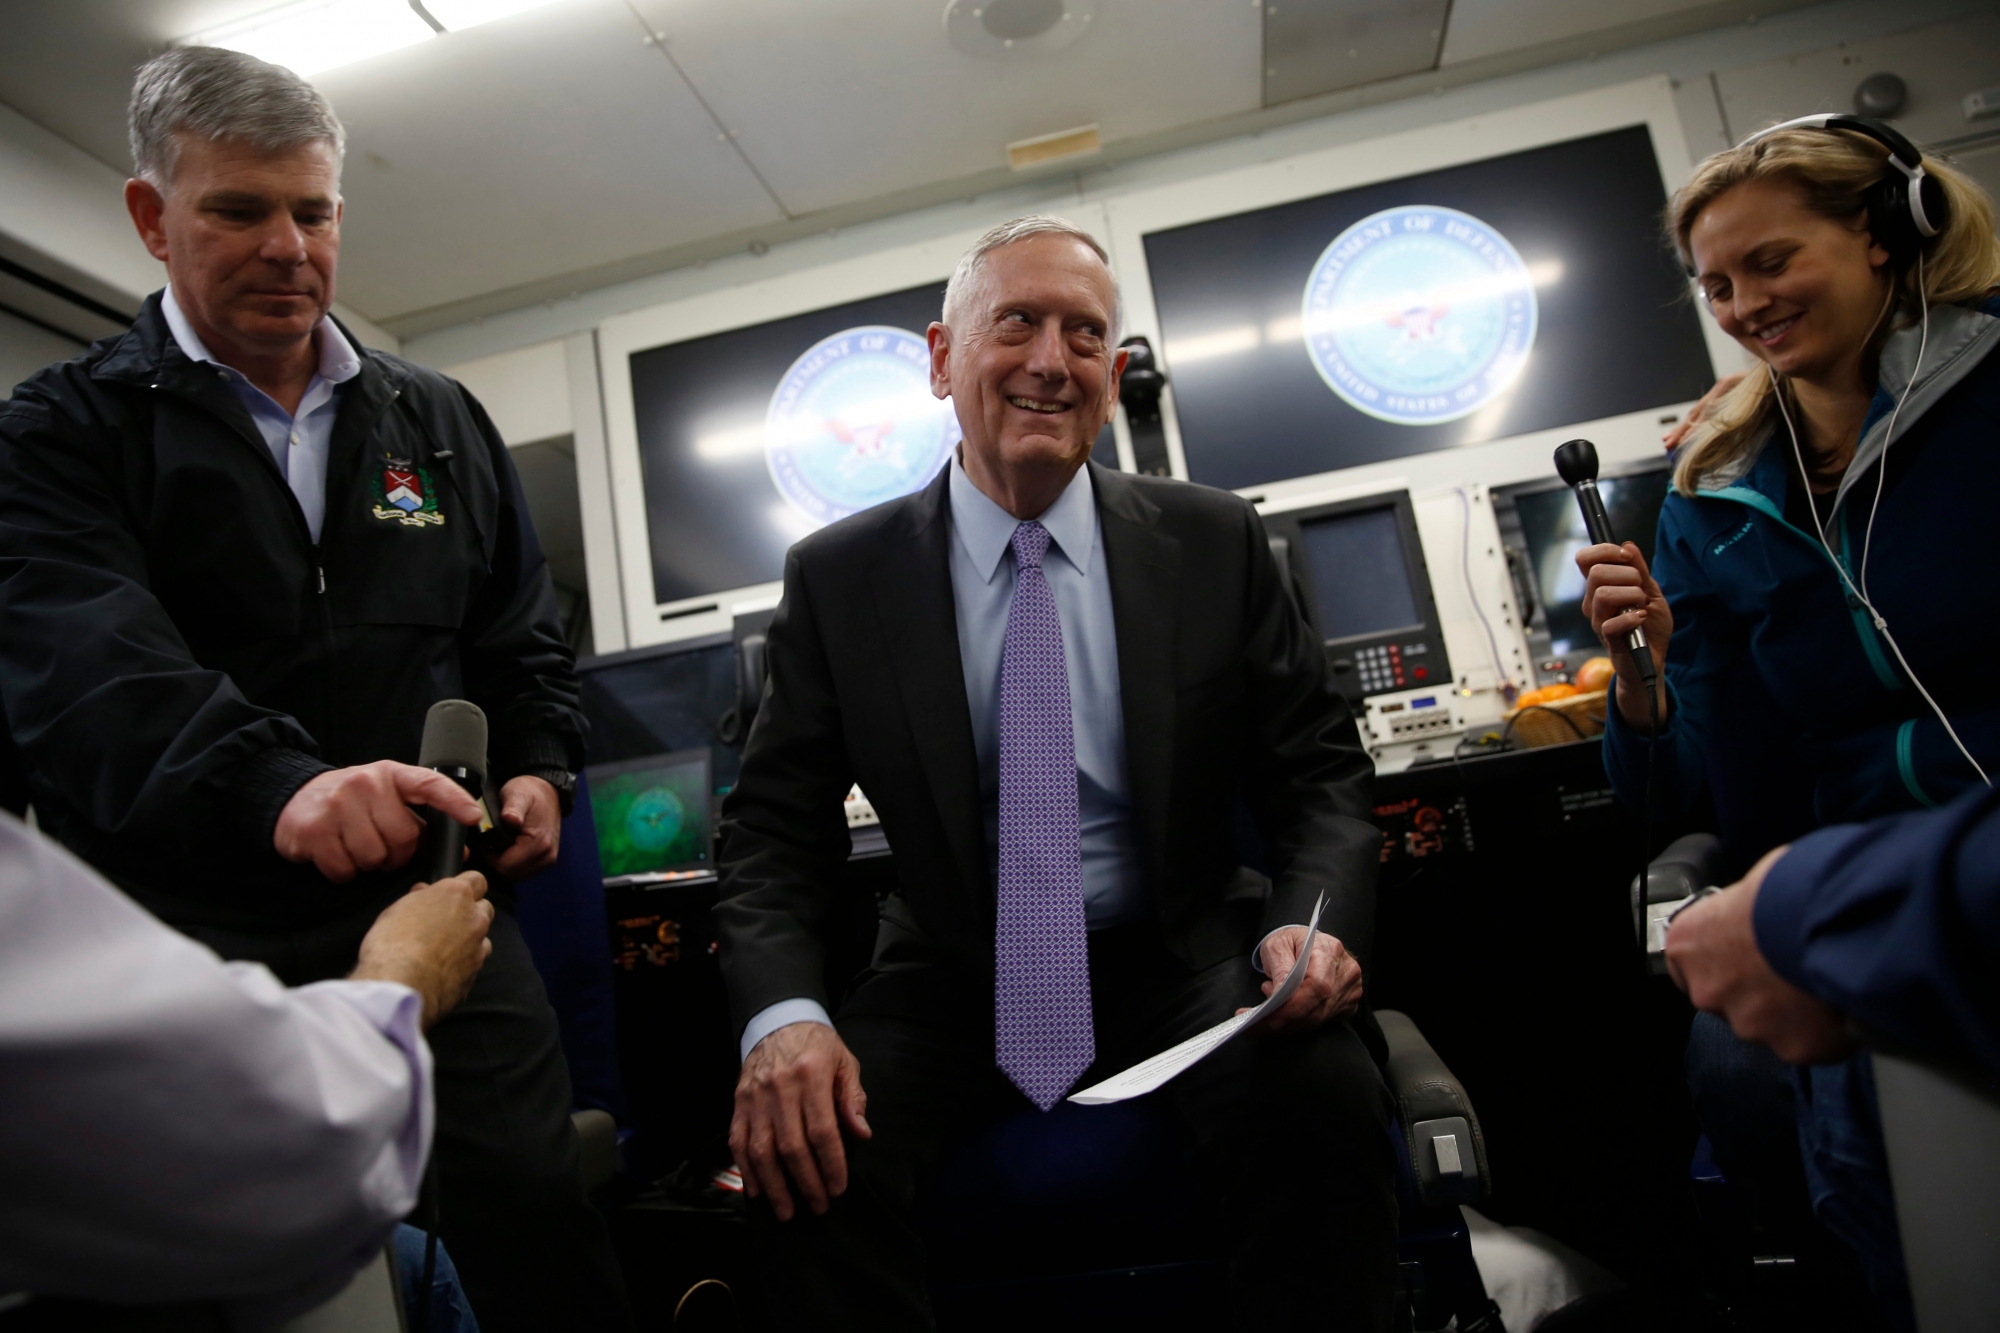 U.S. Defense Secretary James Mattis jokes with reporters as he sits down to brief them in their cabin aboard his plane en route to the Middle East after departing from Joint Base Andrews, Maryland, Monday, April 17, 2017. (Jonathan Ernst/Pool photo via AP) Saudi Arabia US Mattis